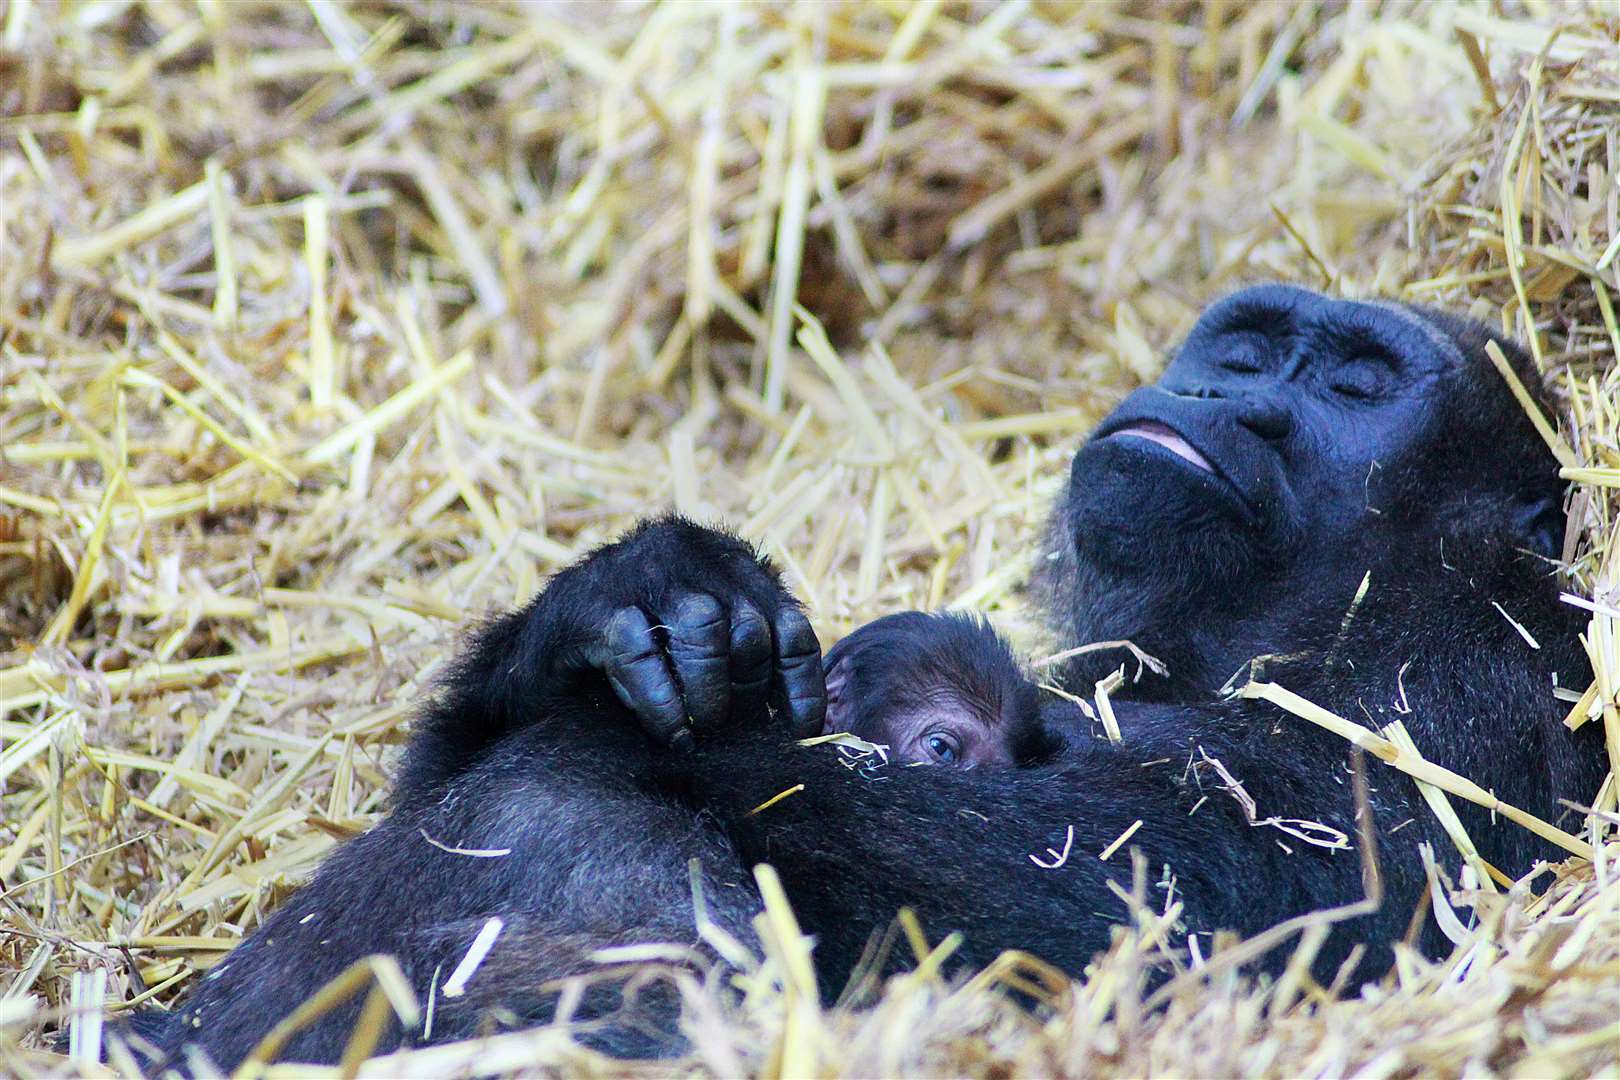 The parks have over a 1,000 animals between them, including this baby gorilla and its mother. Photo credit: Leanne Smith